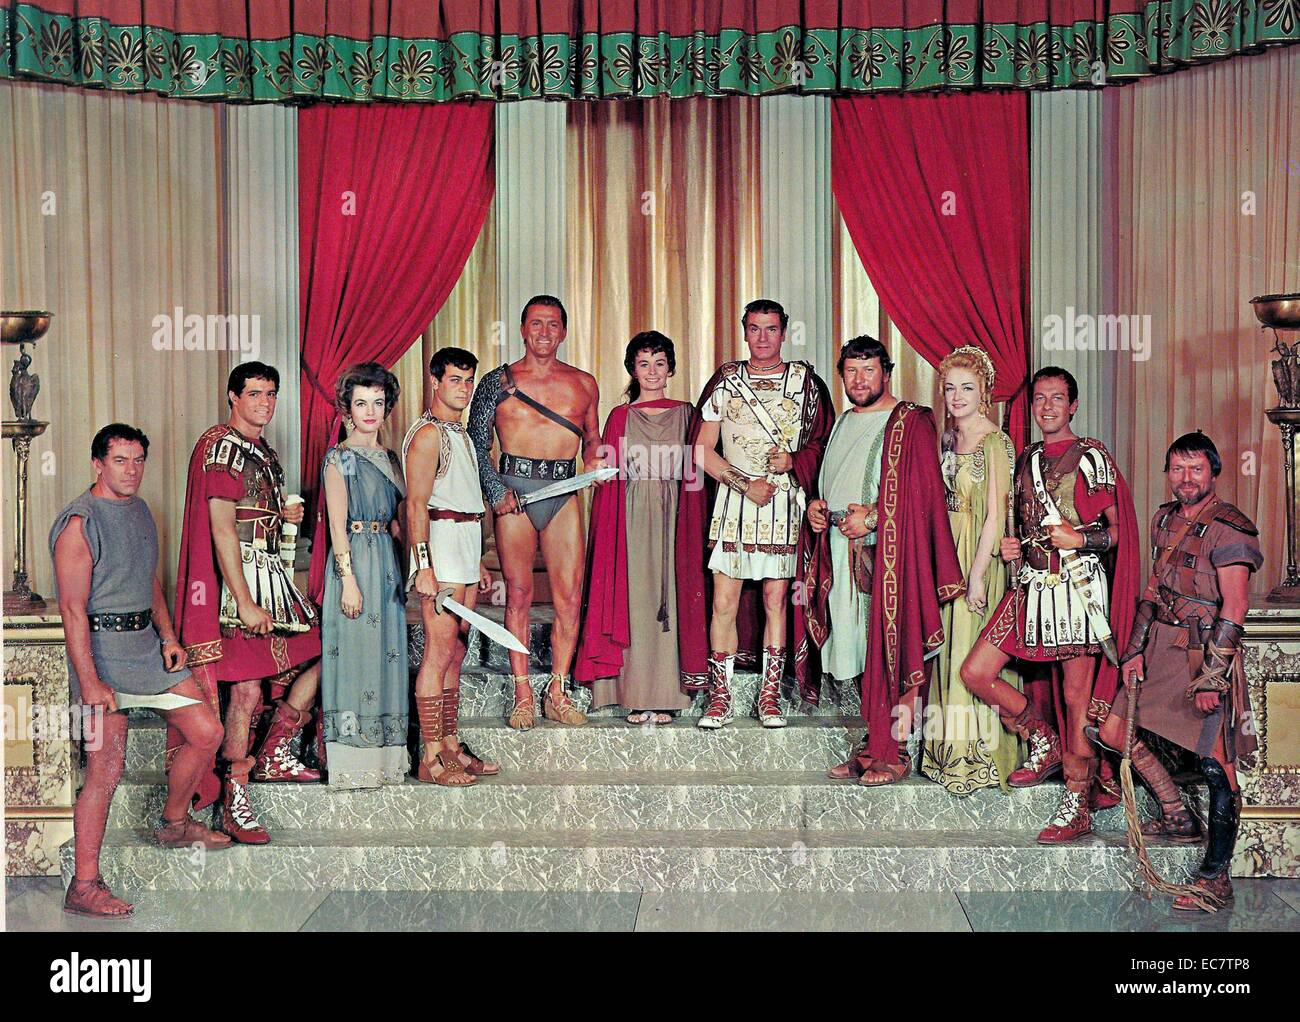 Spartacus is a 1960 American epic historical drama film directed by Stanley Kubrick and starring Kirk Douglas as the rebellious slave of the title. The screenplay was based on the novel Spartacus by Howard Fast. It was inspired by the life story of the historical figure Spartacus and the events of the Third Servile War. Stock Photo